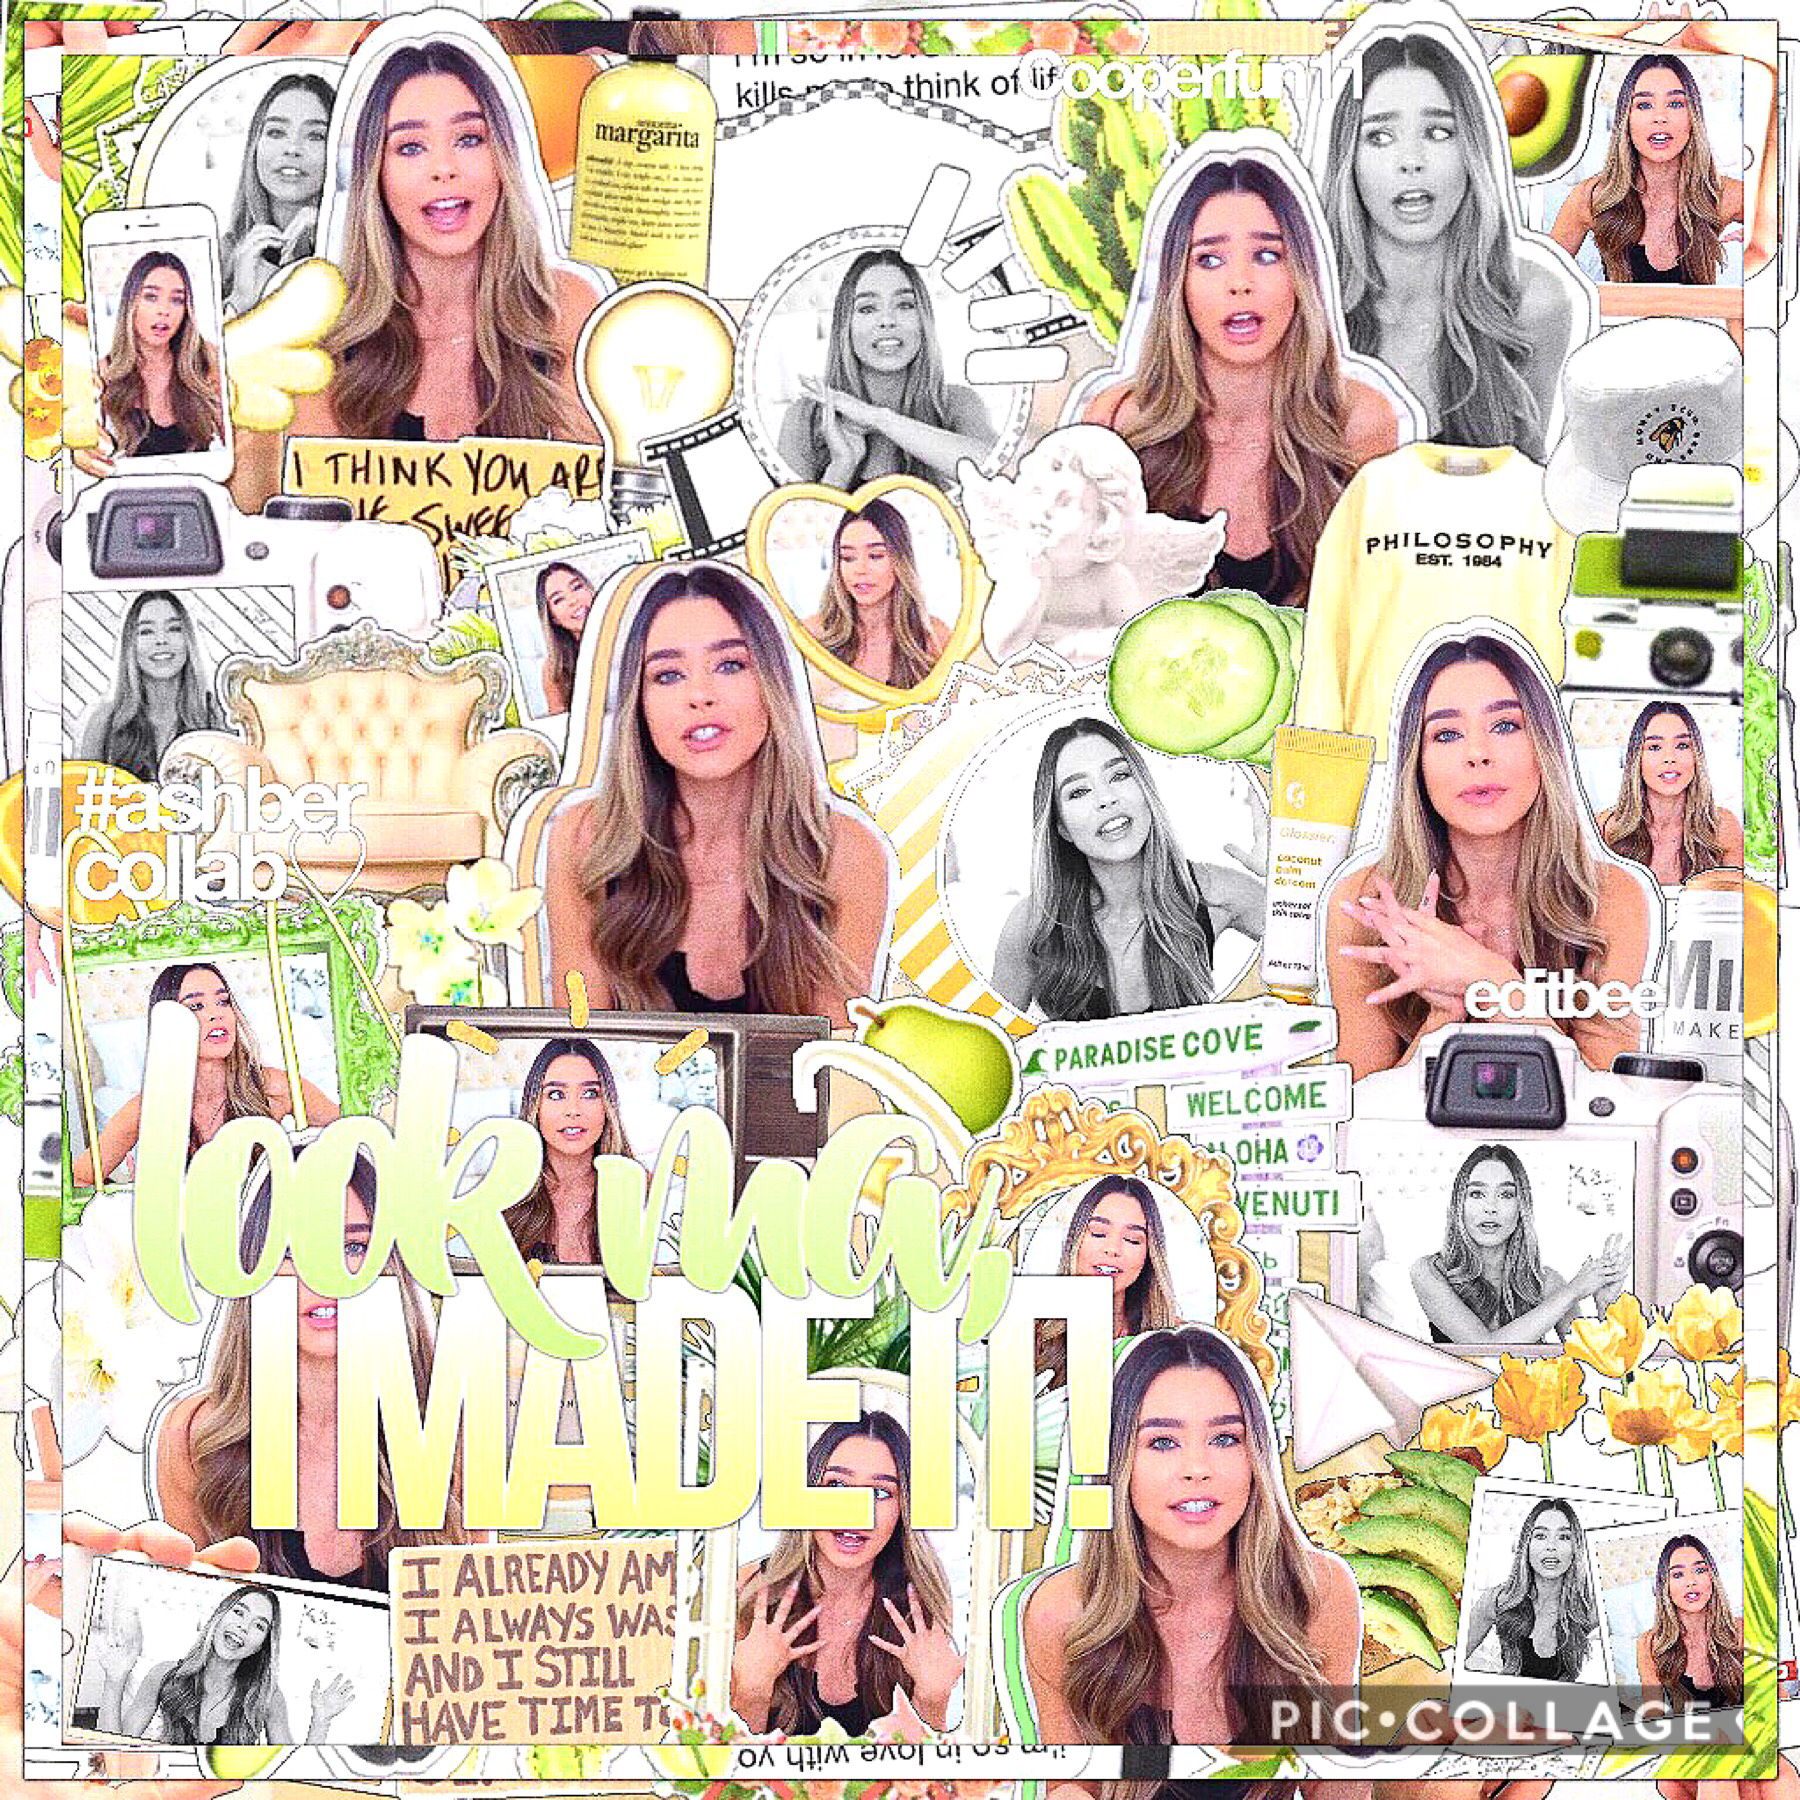 collab w/ asha💛 I am in love with this collab!🌻